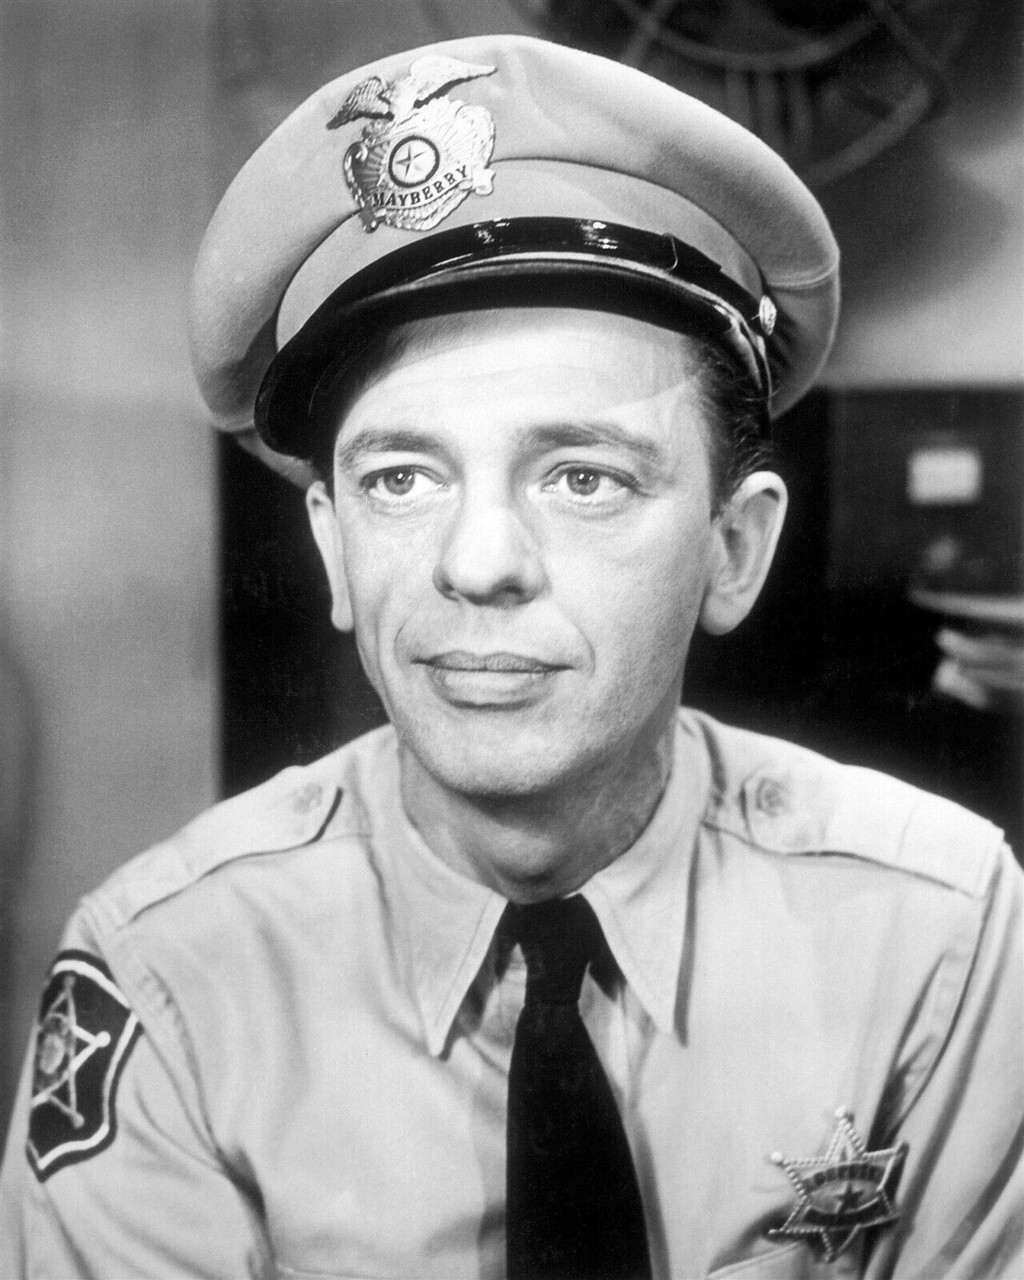 Don Knotts as Barney Fife in police uniform Andy Griffith Show 8x10 ...